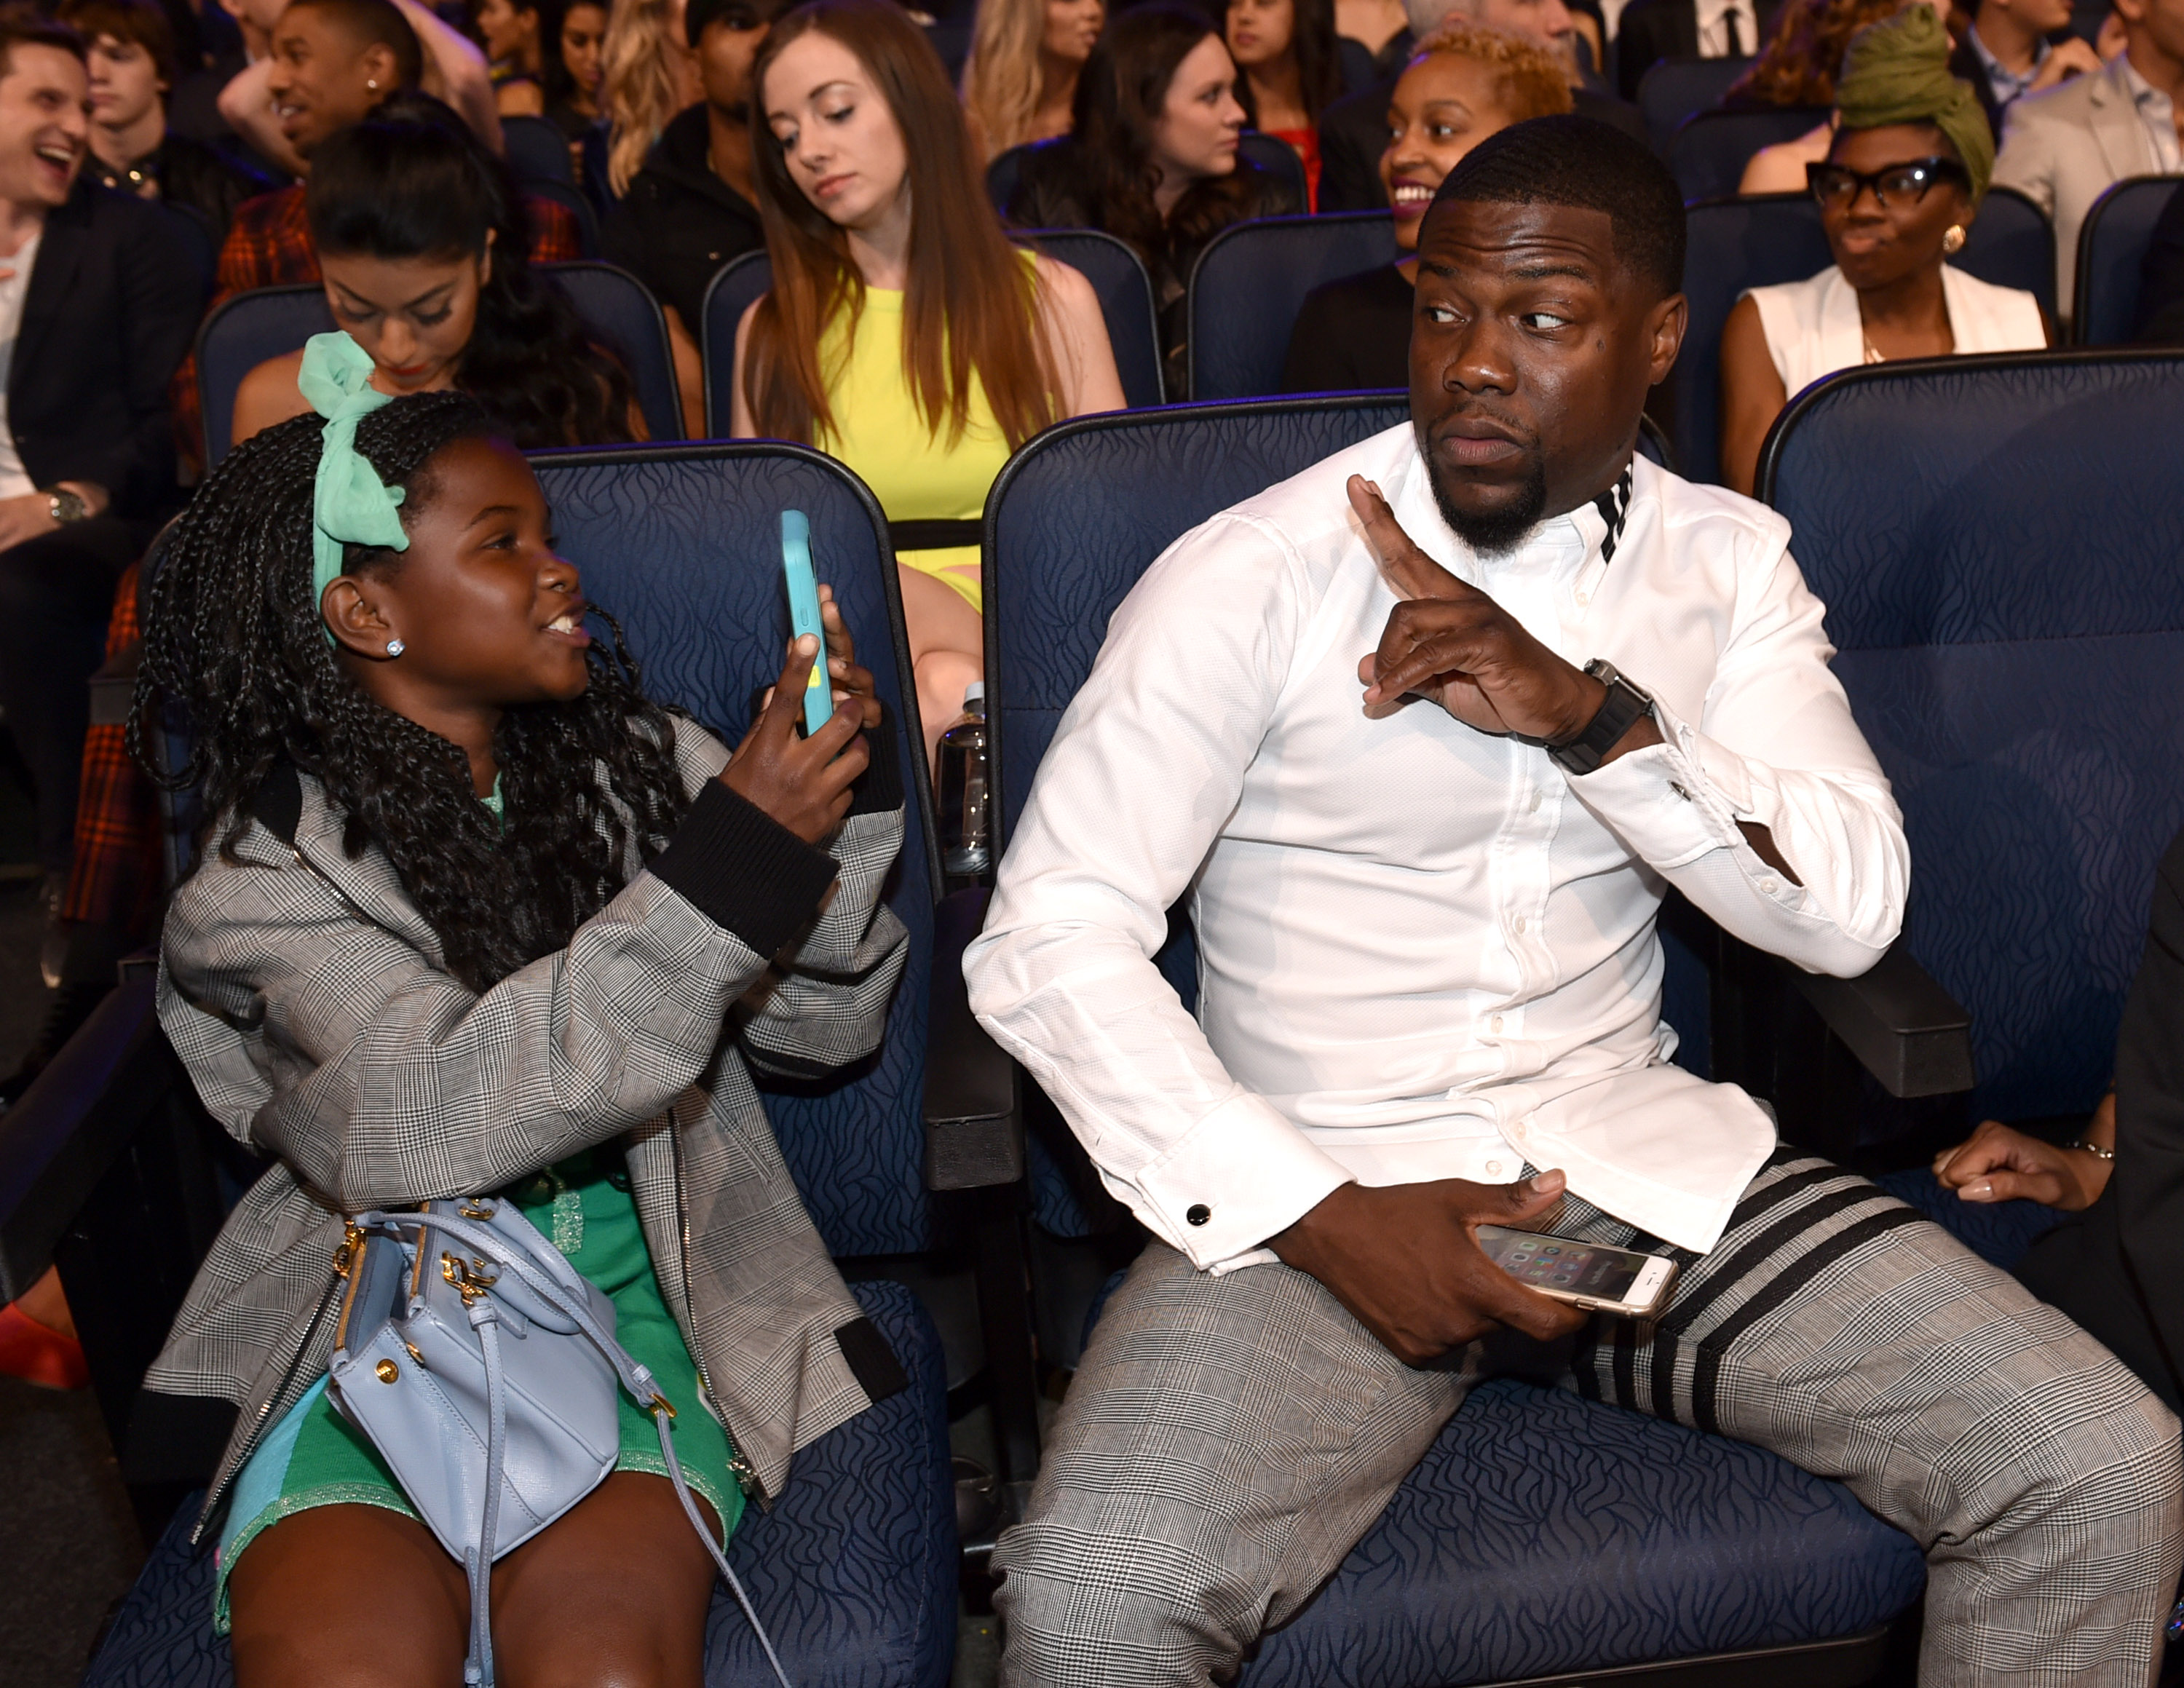 Kevin Hart and Heaven Hart sat at The 2015 MTV Movie Awards at Nokia Theatre L.A. Live in Los Angeles, California, on April 12, 2015. | Source: Getty Images